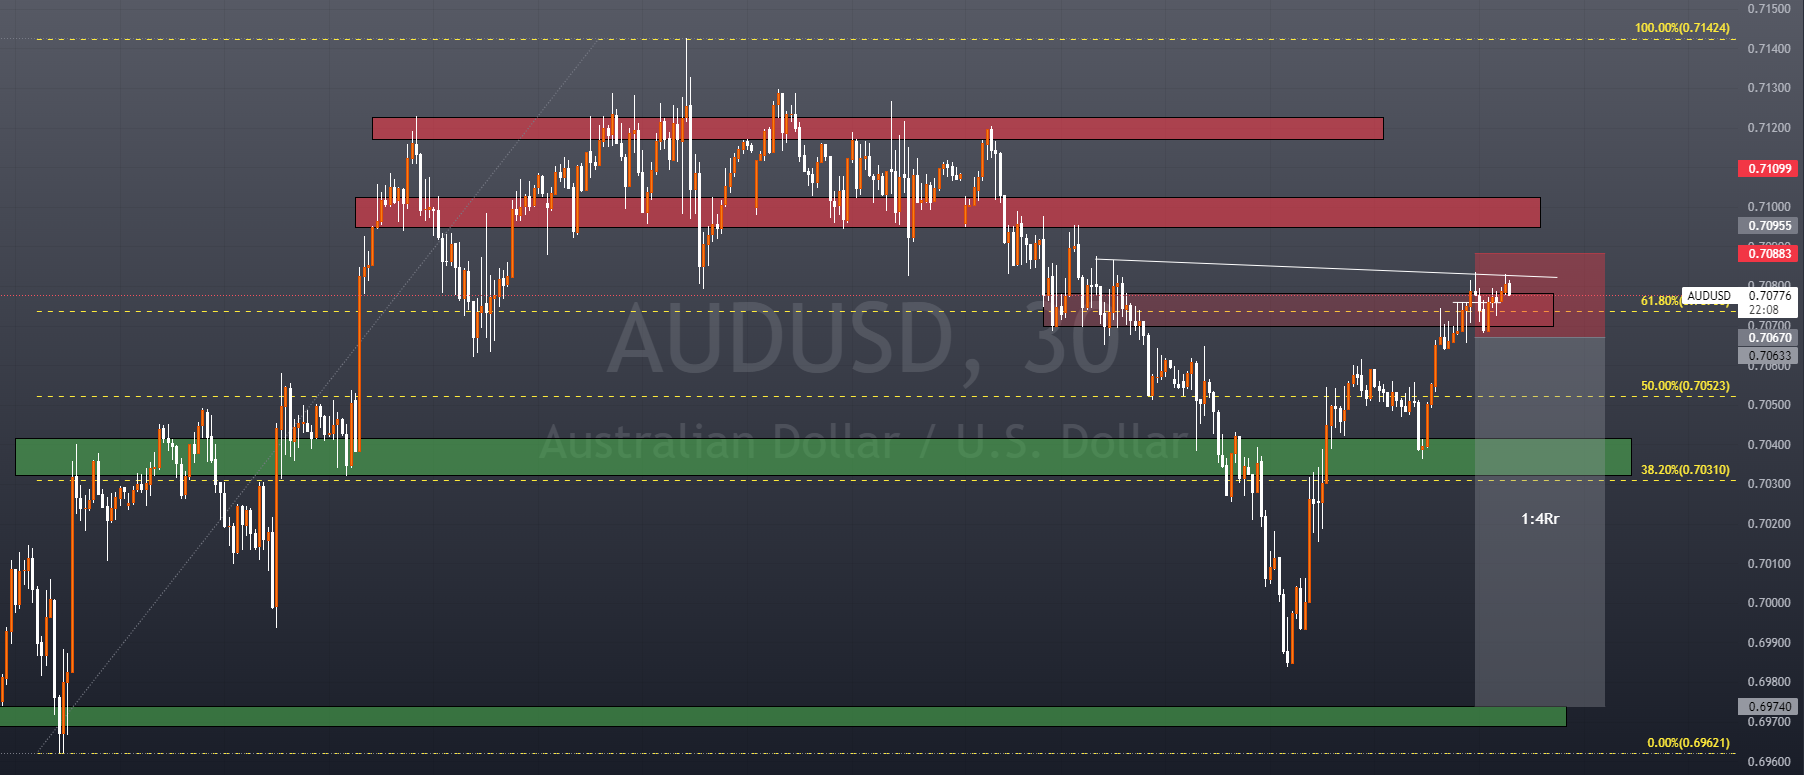 AUD/USD M30 Break and Retest of support zone with .618 feb level.Trendline confirmation